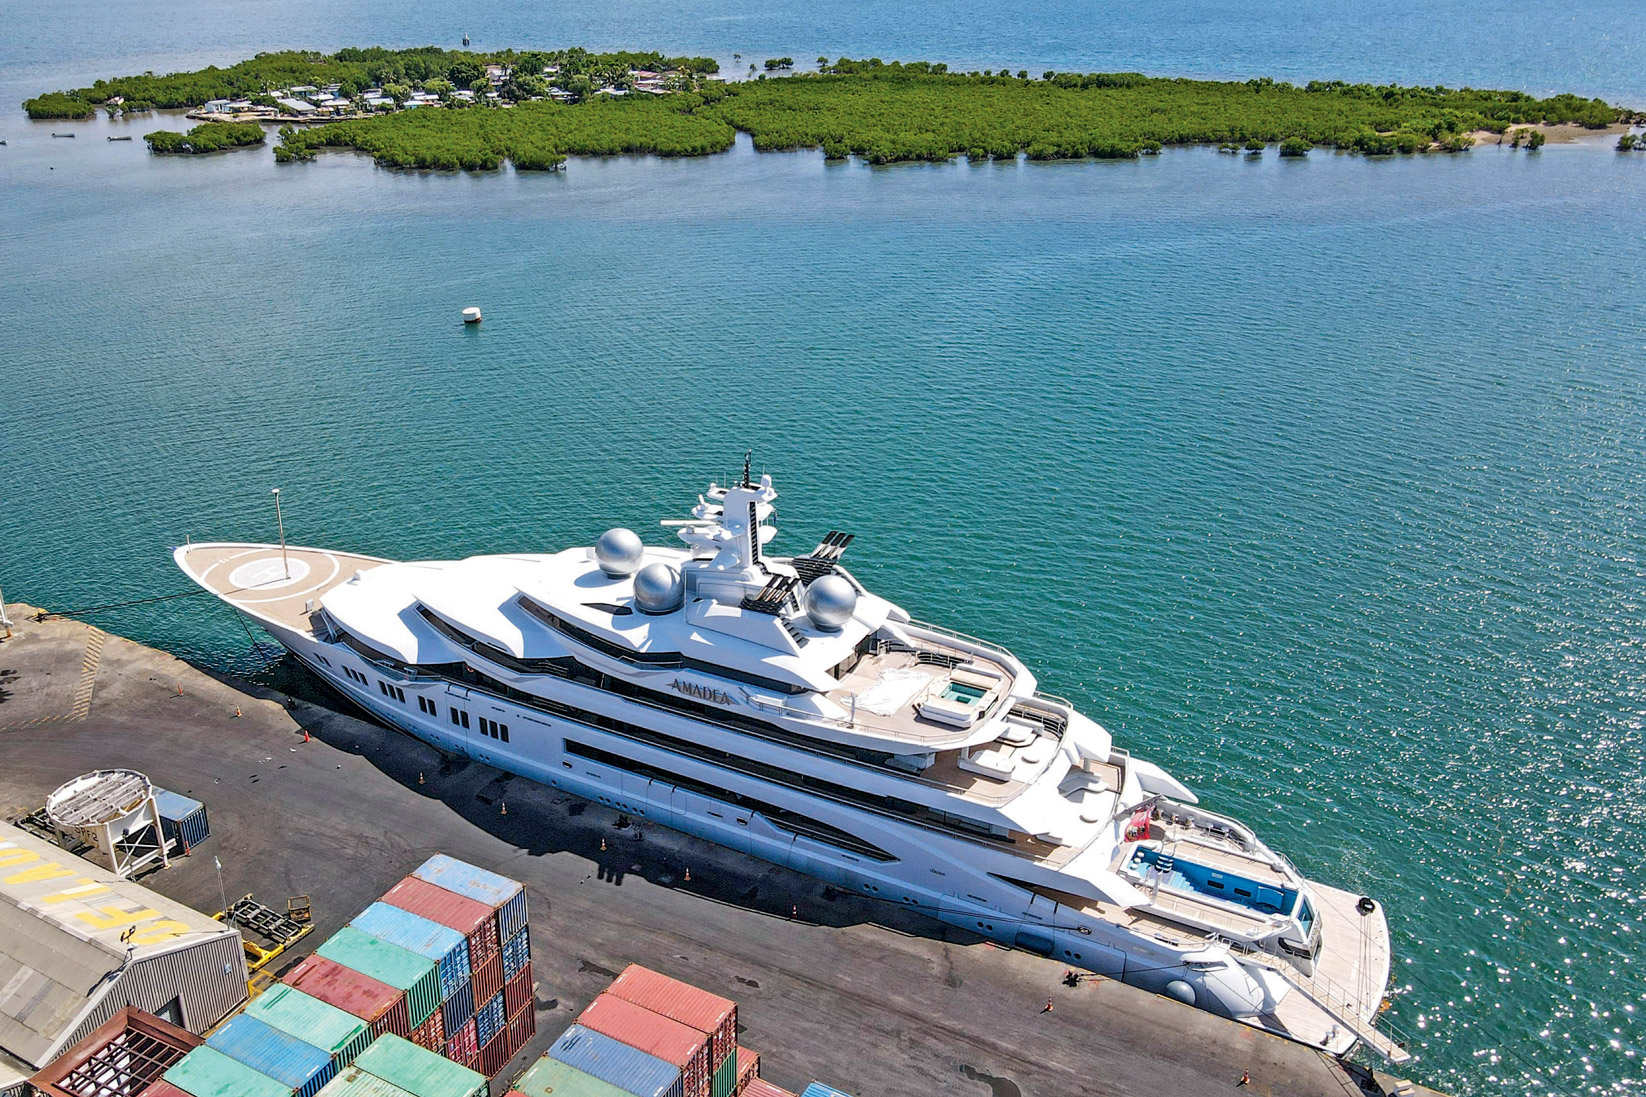 The superyacht Amadea is docked at the Queens Wharf in Lautoka, Fiji, on April 15.